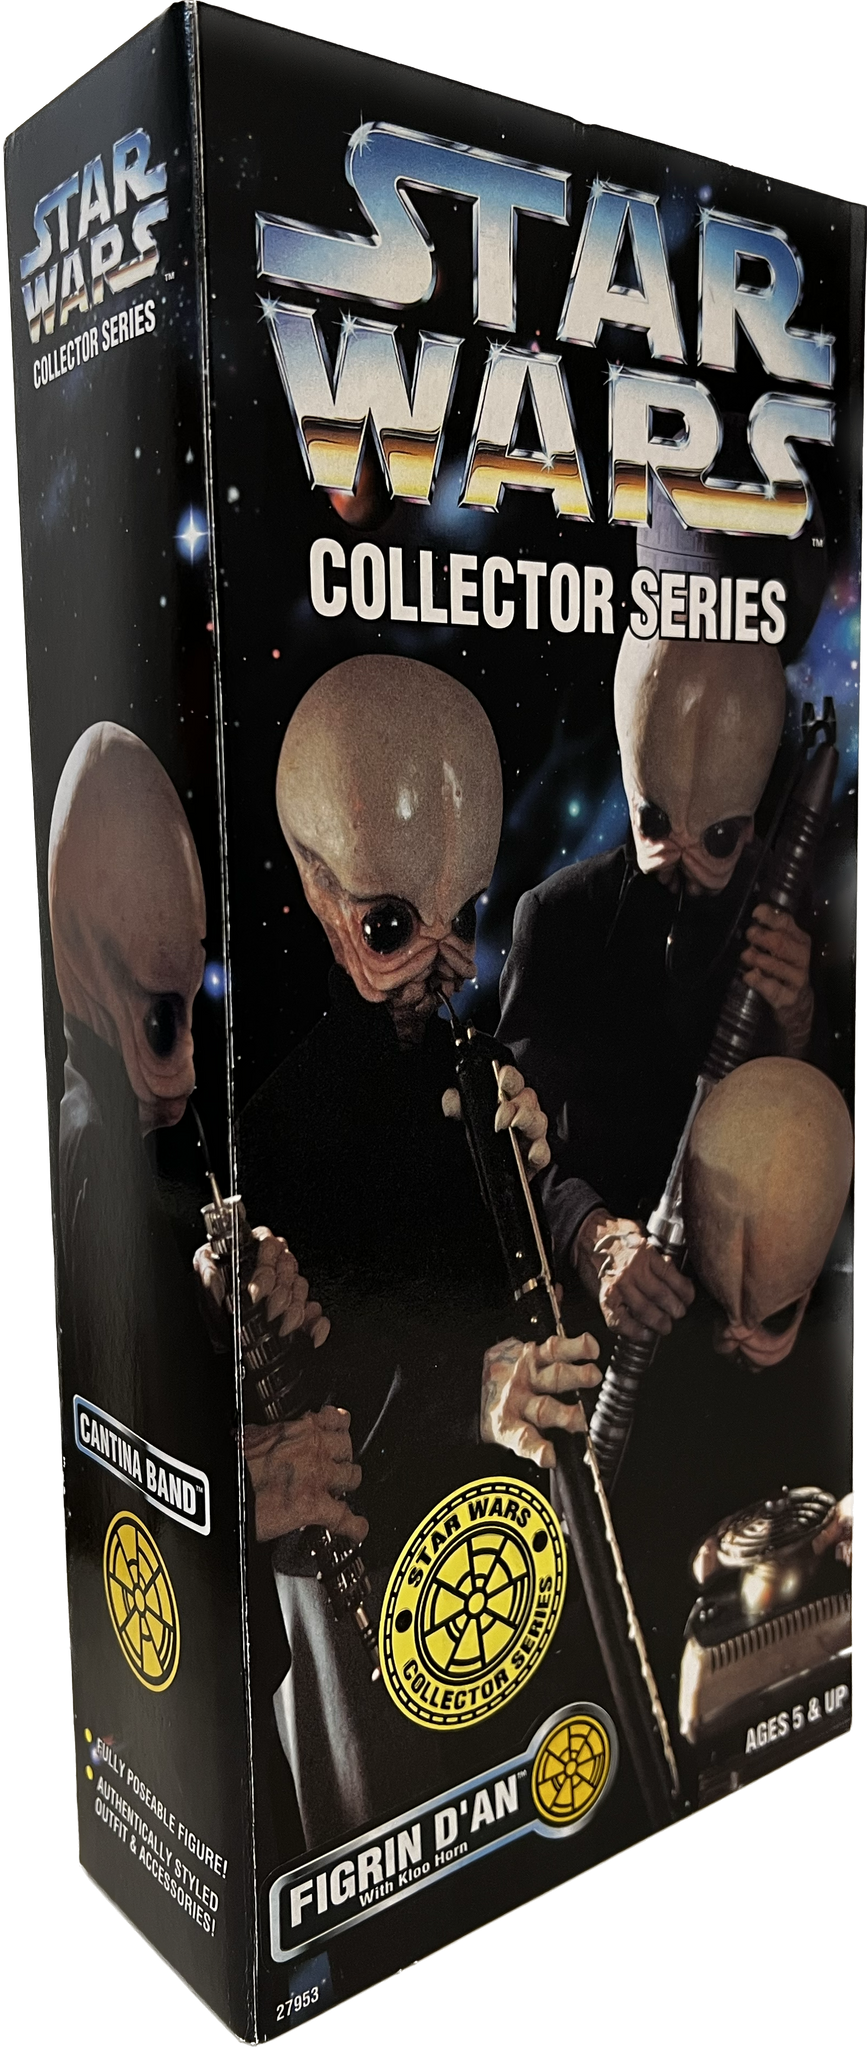 Star Wars Collector Series 12 inch Cantina Band Figrin D'An